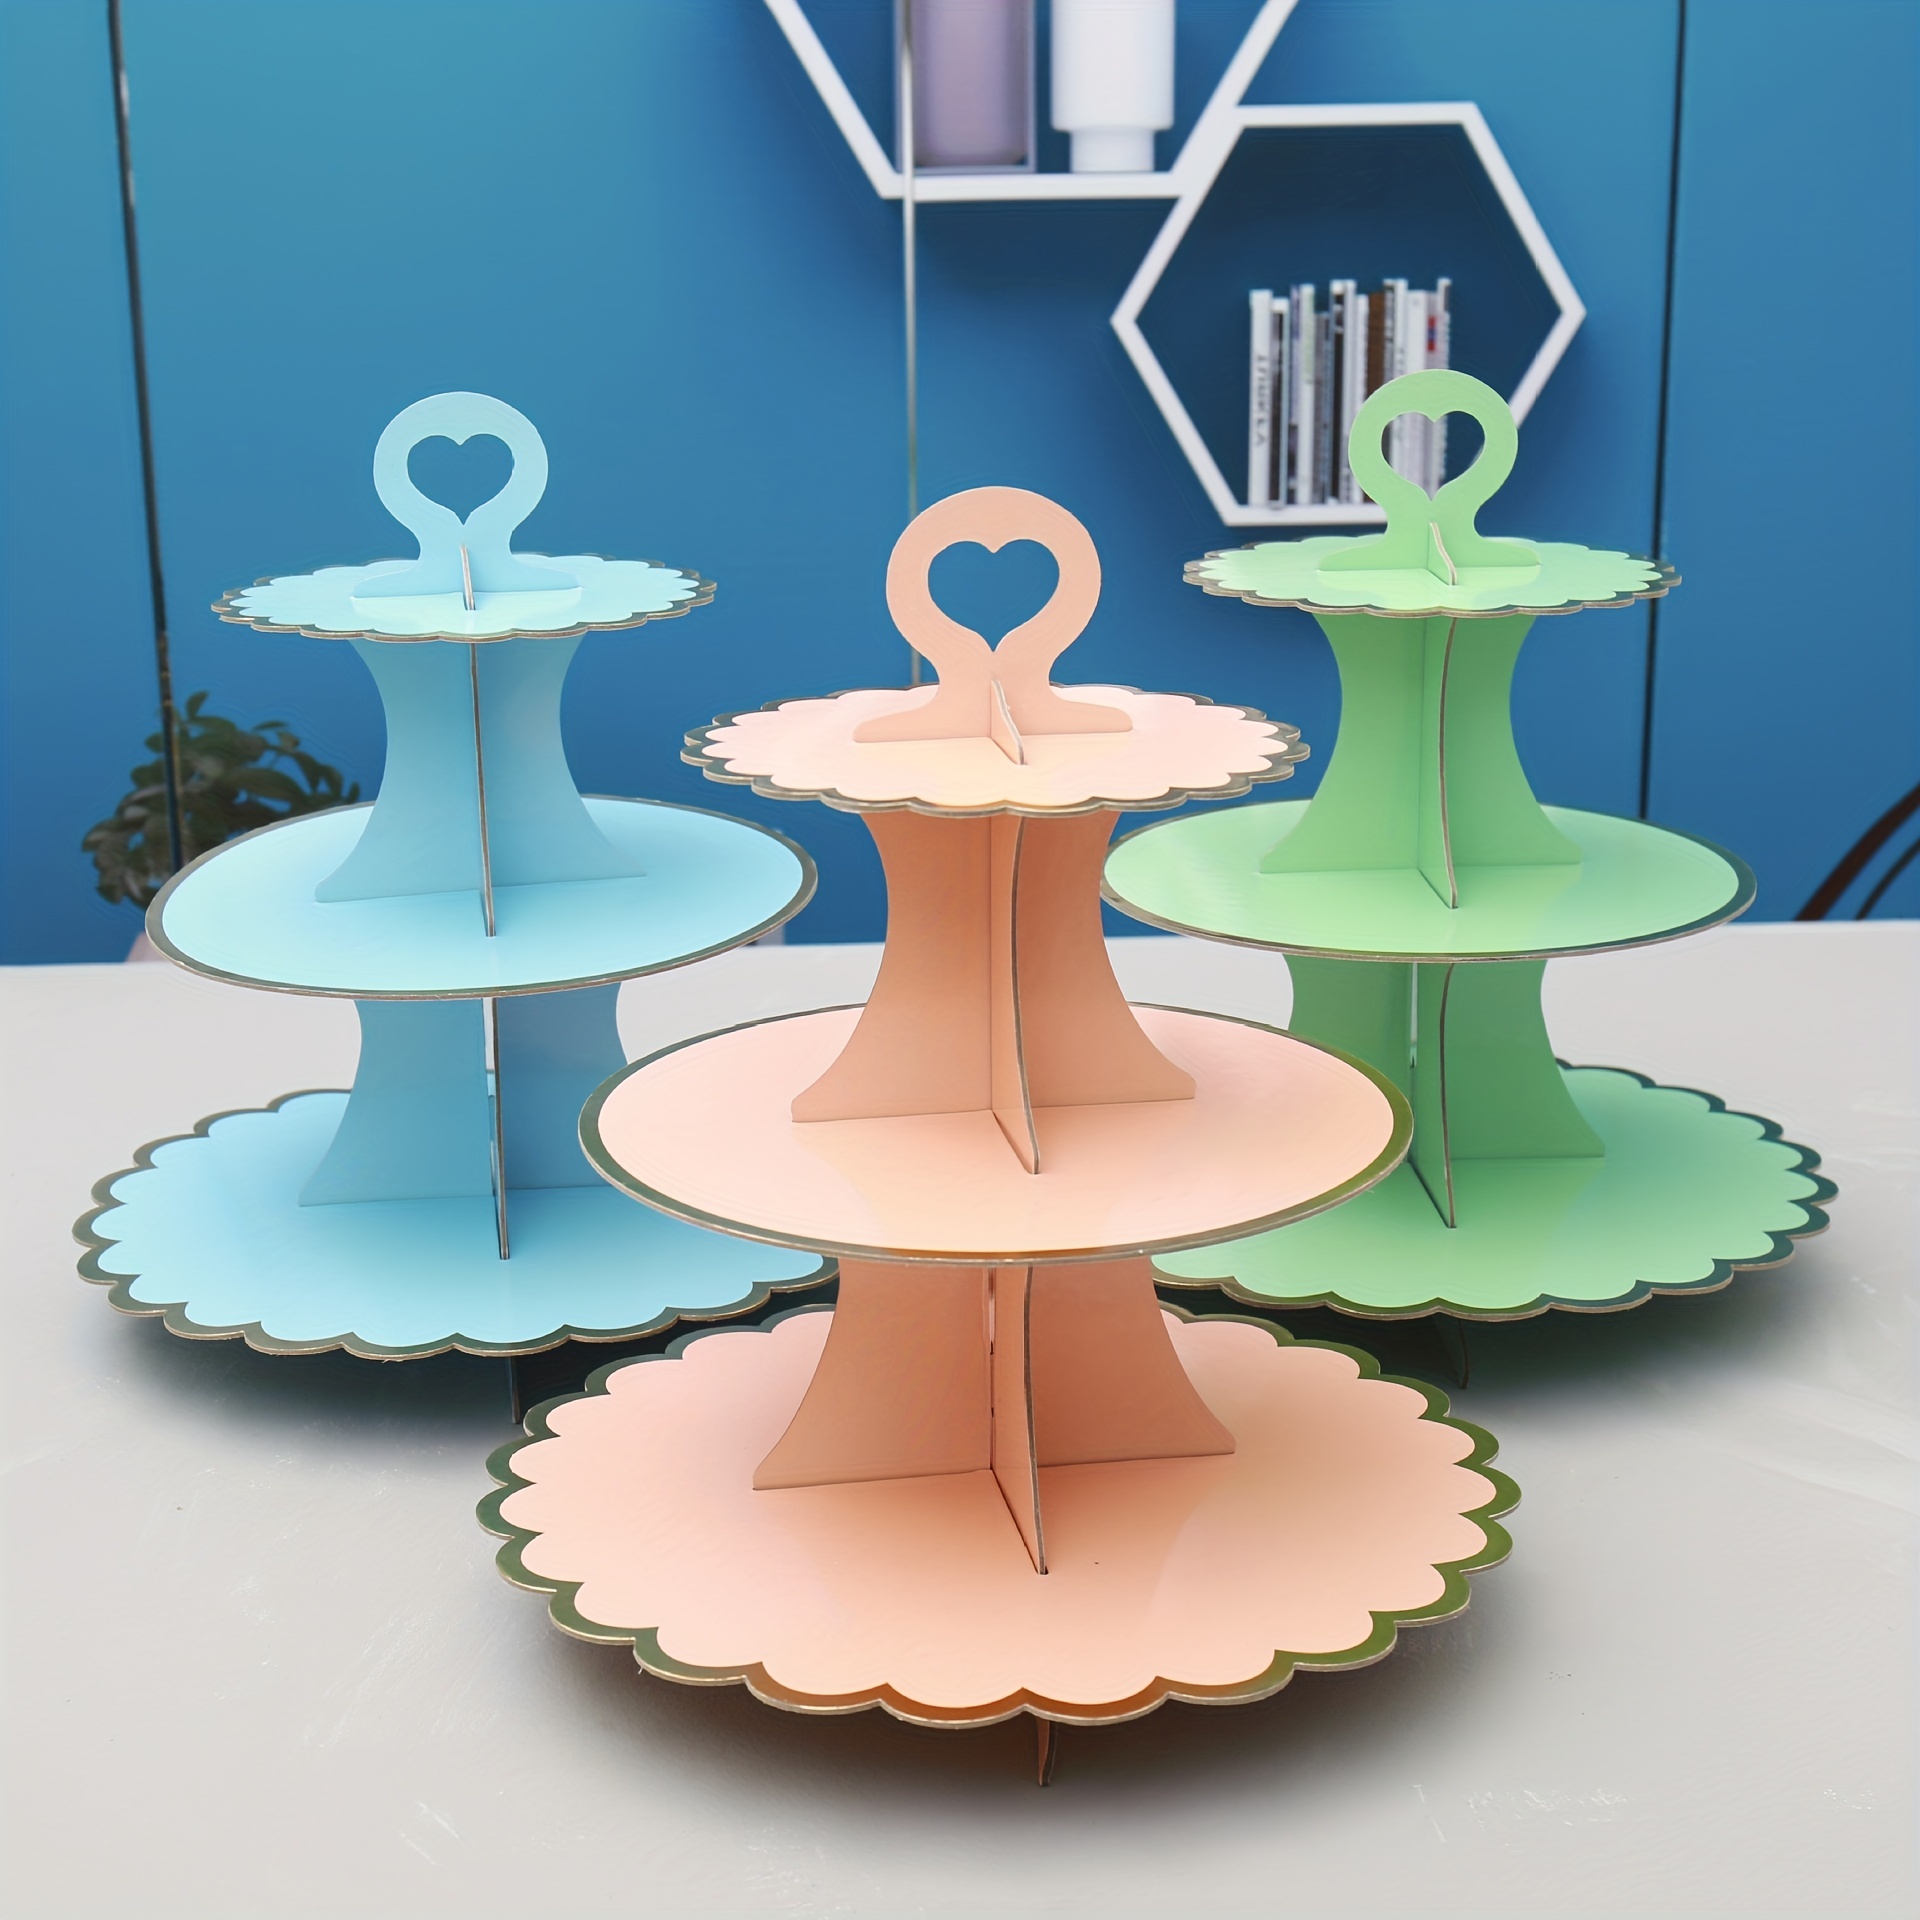 Cake Tray 3 Tier Paper Cake Stand: Cardboard Cupcake Stand Tower Disposable  Dessert Holder Rack Birthday Party Treat Pastry Serving Platters Yellow Cake  Display Stand : Amazon.ca: Home